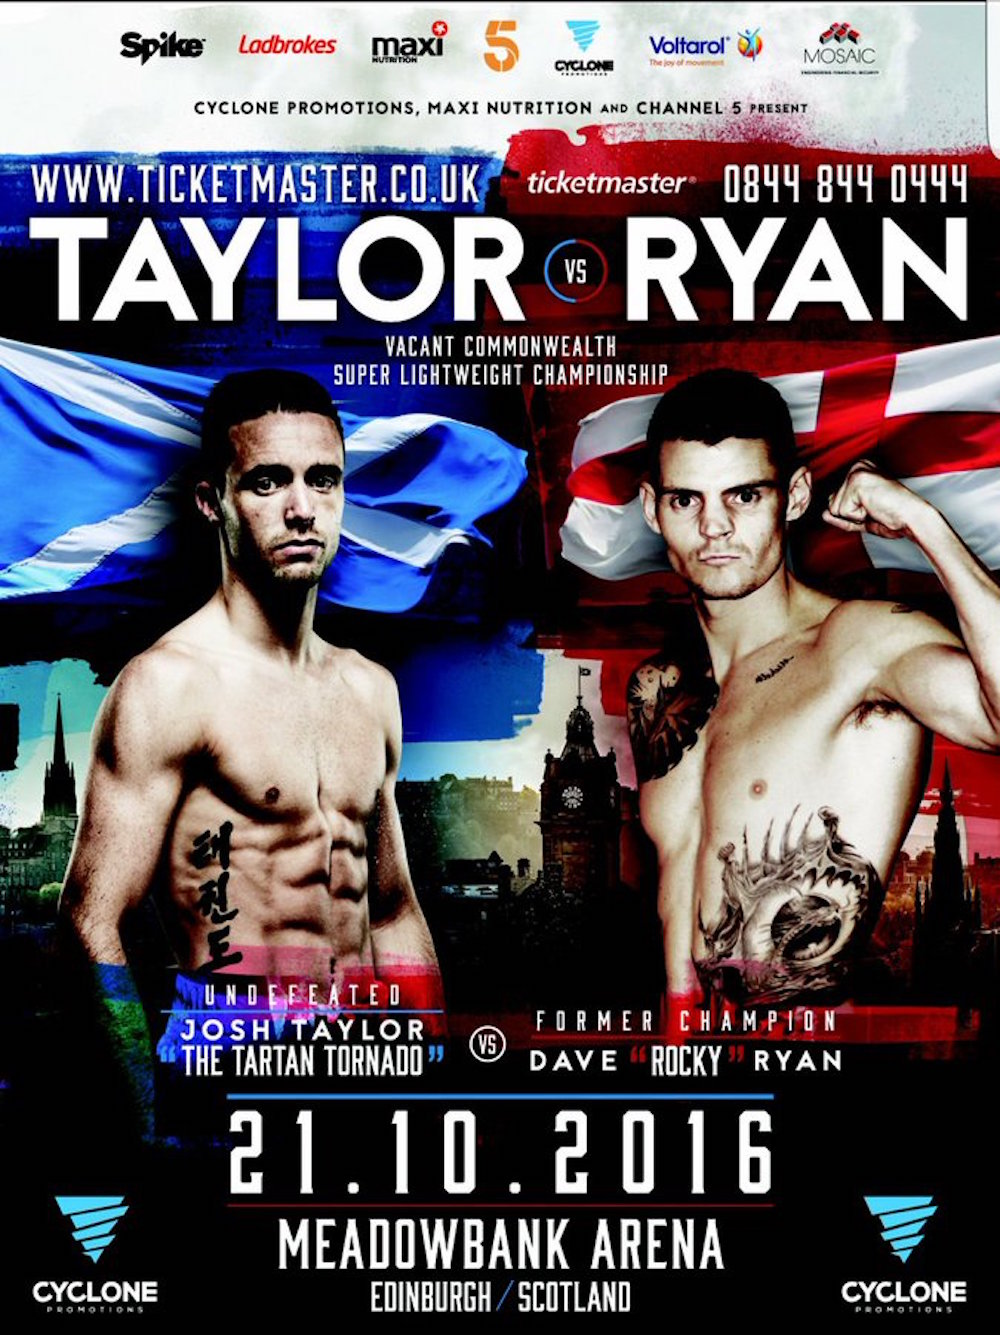 Boxer Josh Taylor hopes ditching junk food will help him dump Dave Ryan in title fight